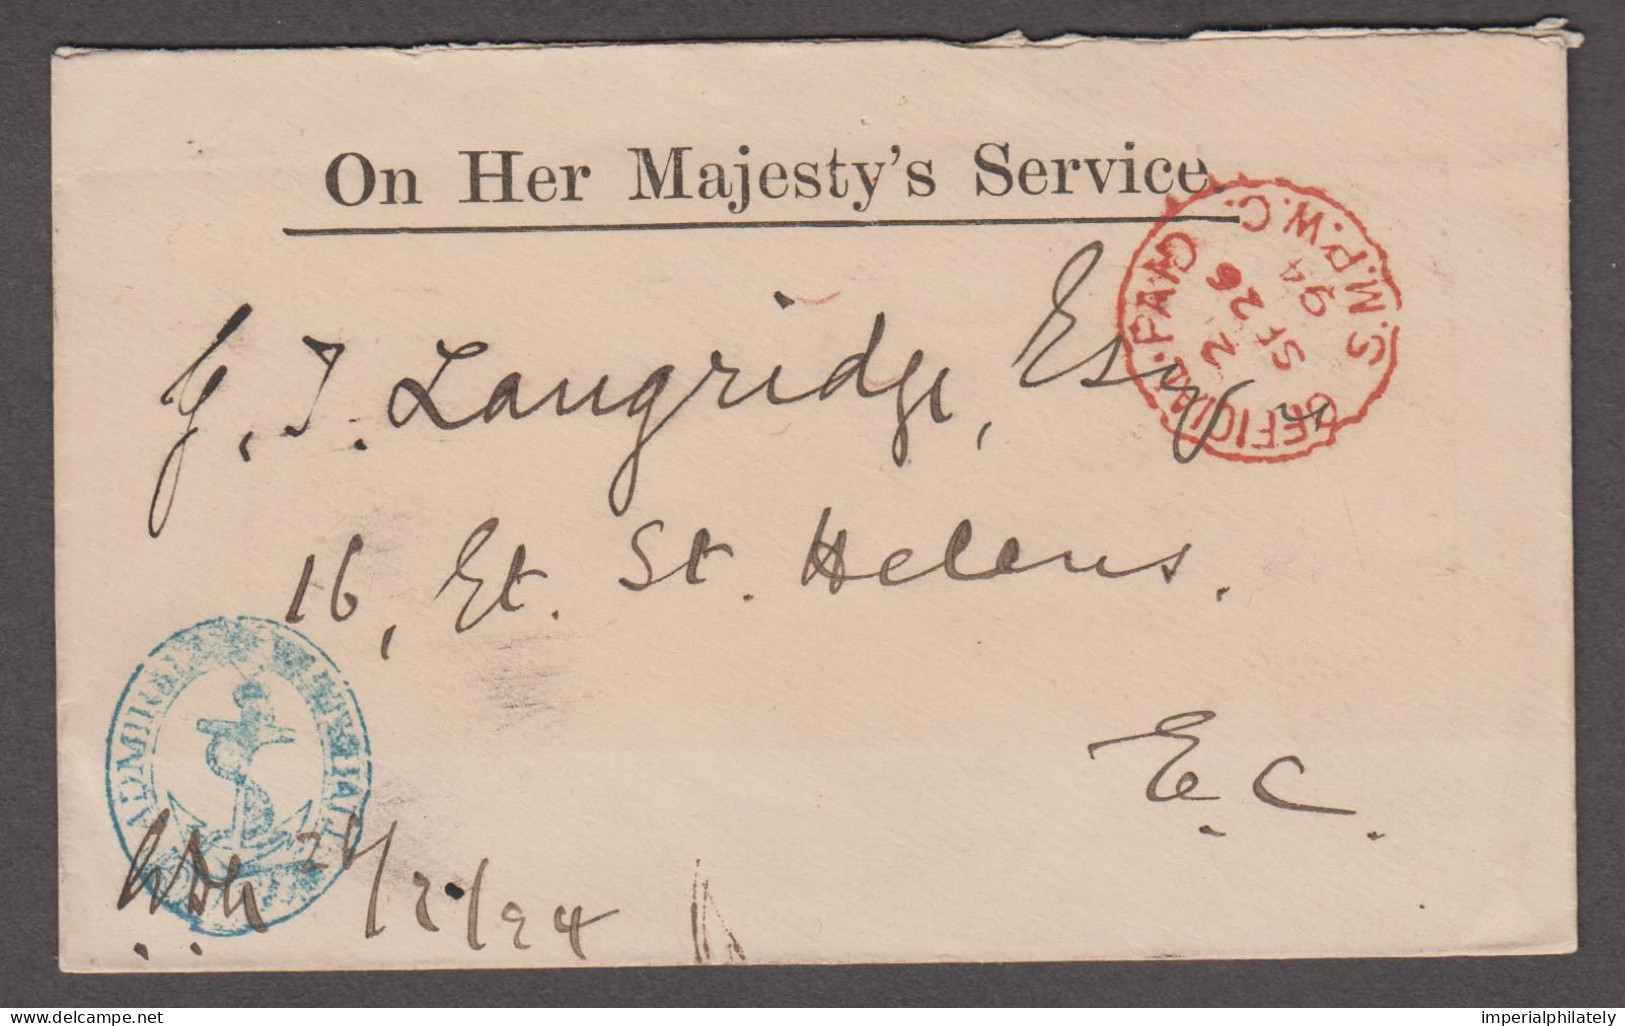 1894 (Sep 26) OHMS Envelope With "Admiralty Whitehall" Anchor Cachet And Official Paid Cds, Fine - Officials